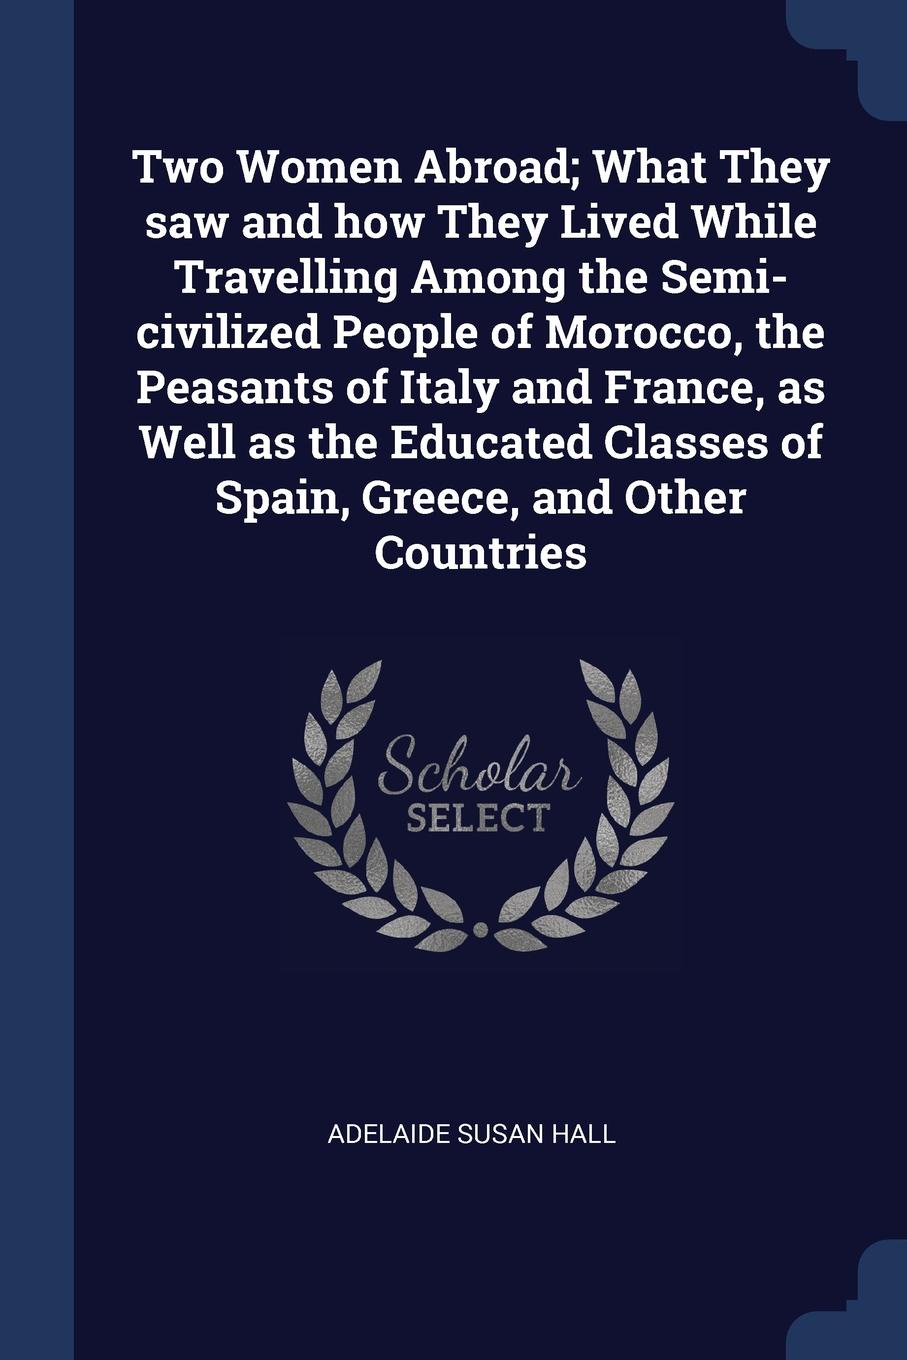 Two Women Abroad; What They saw and how They Lived While Travelling Among the Semi-civilized People of Morocco, the Peasants of Italy and France, as Well as the Educated Classes of Spain, Greece, and Other Countries